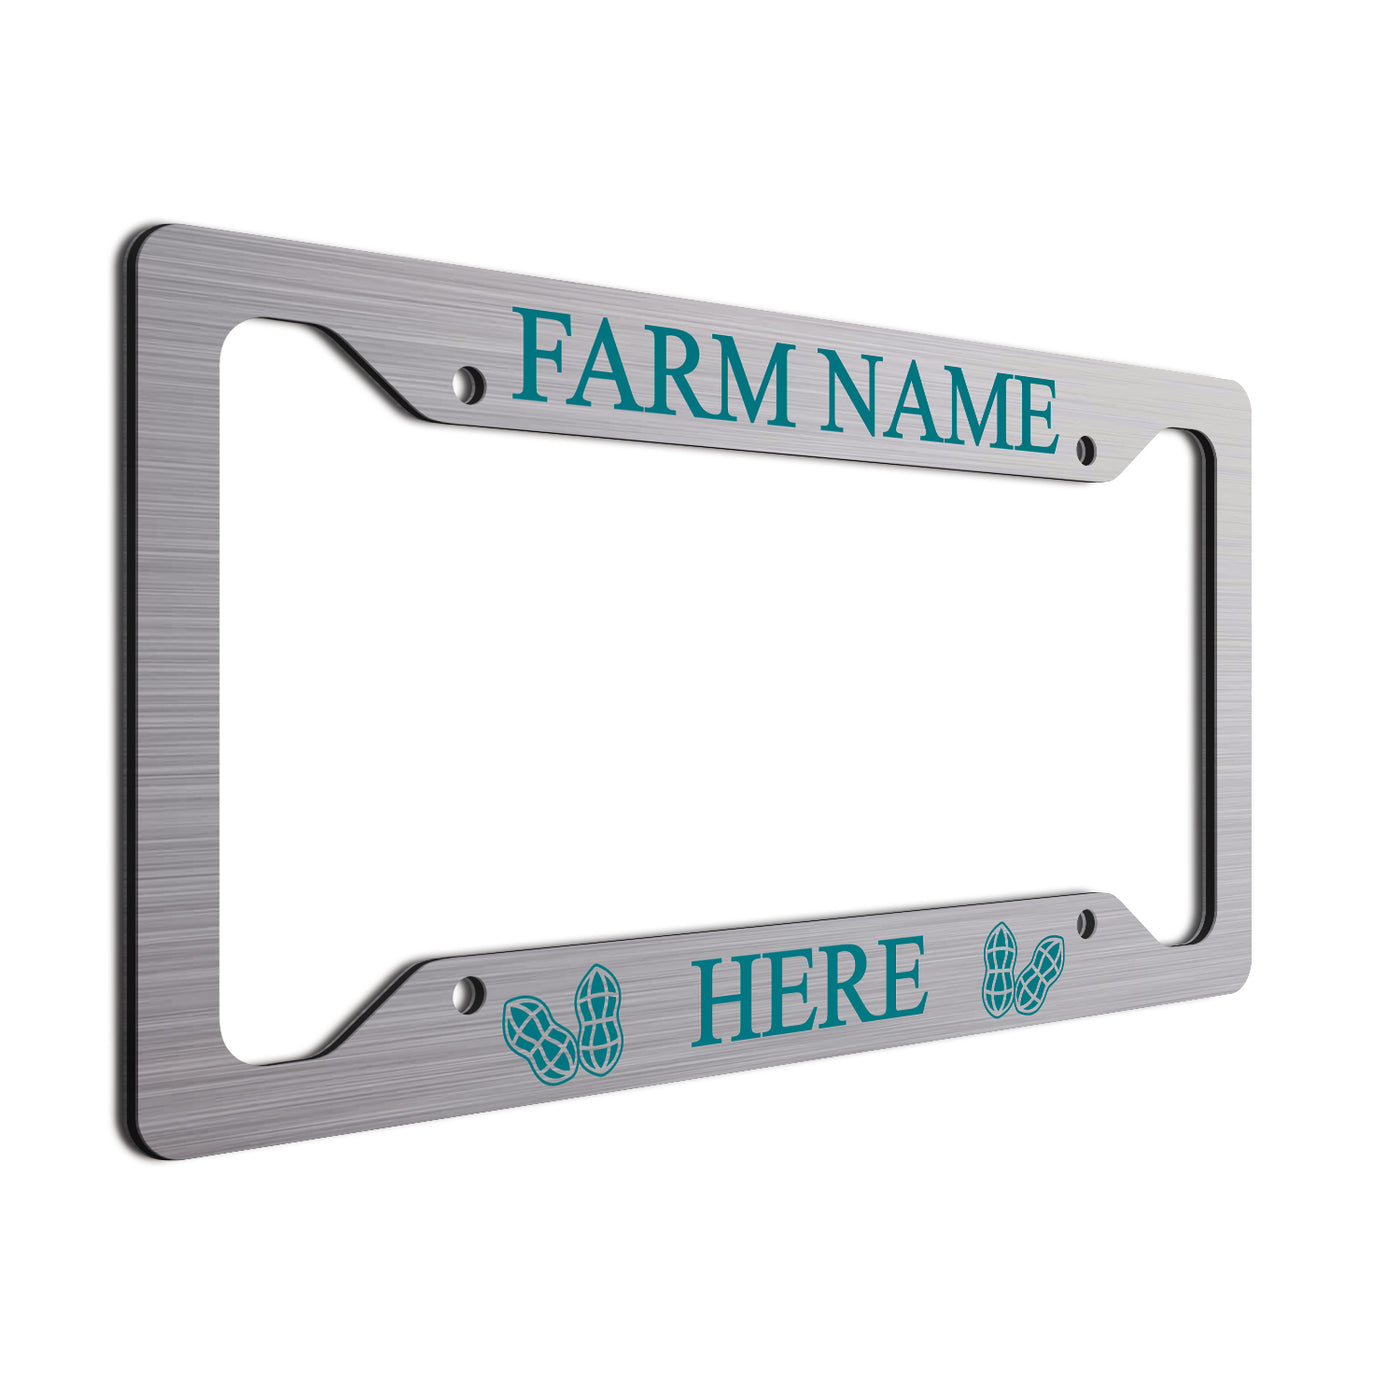 Personalized License Plate Frame For farmers. Choice of colors. Beautiful Brushed Aluminum. Your farm or ranch name will shine!